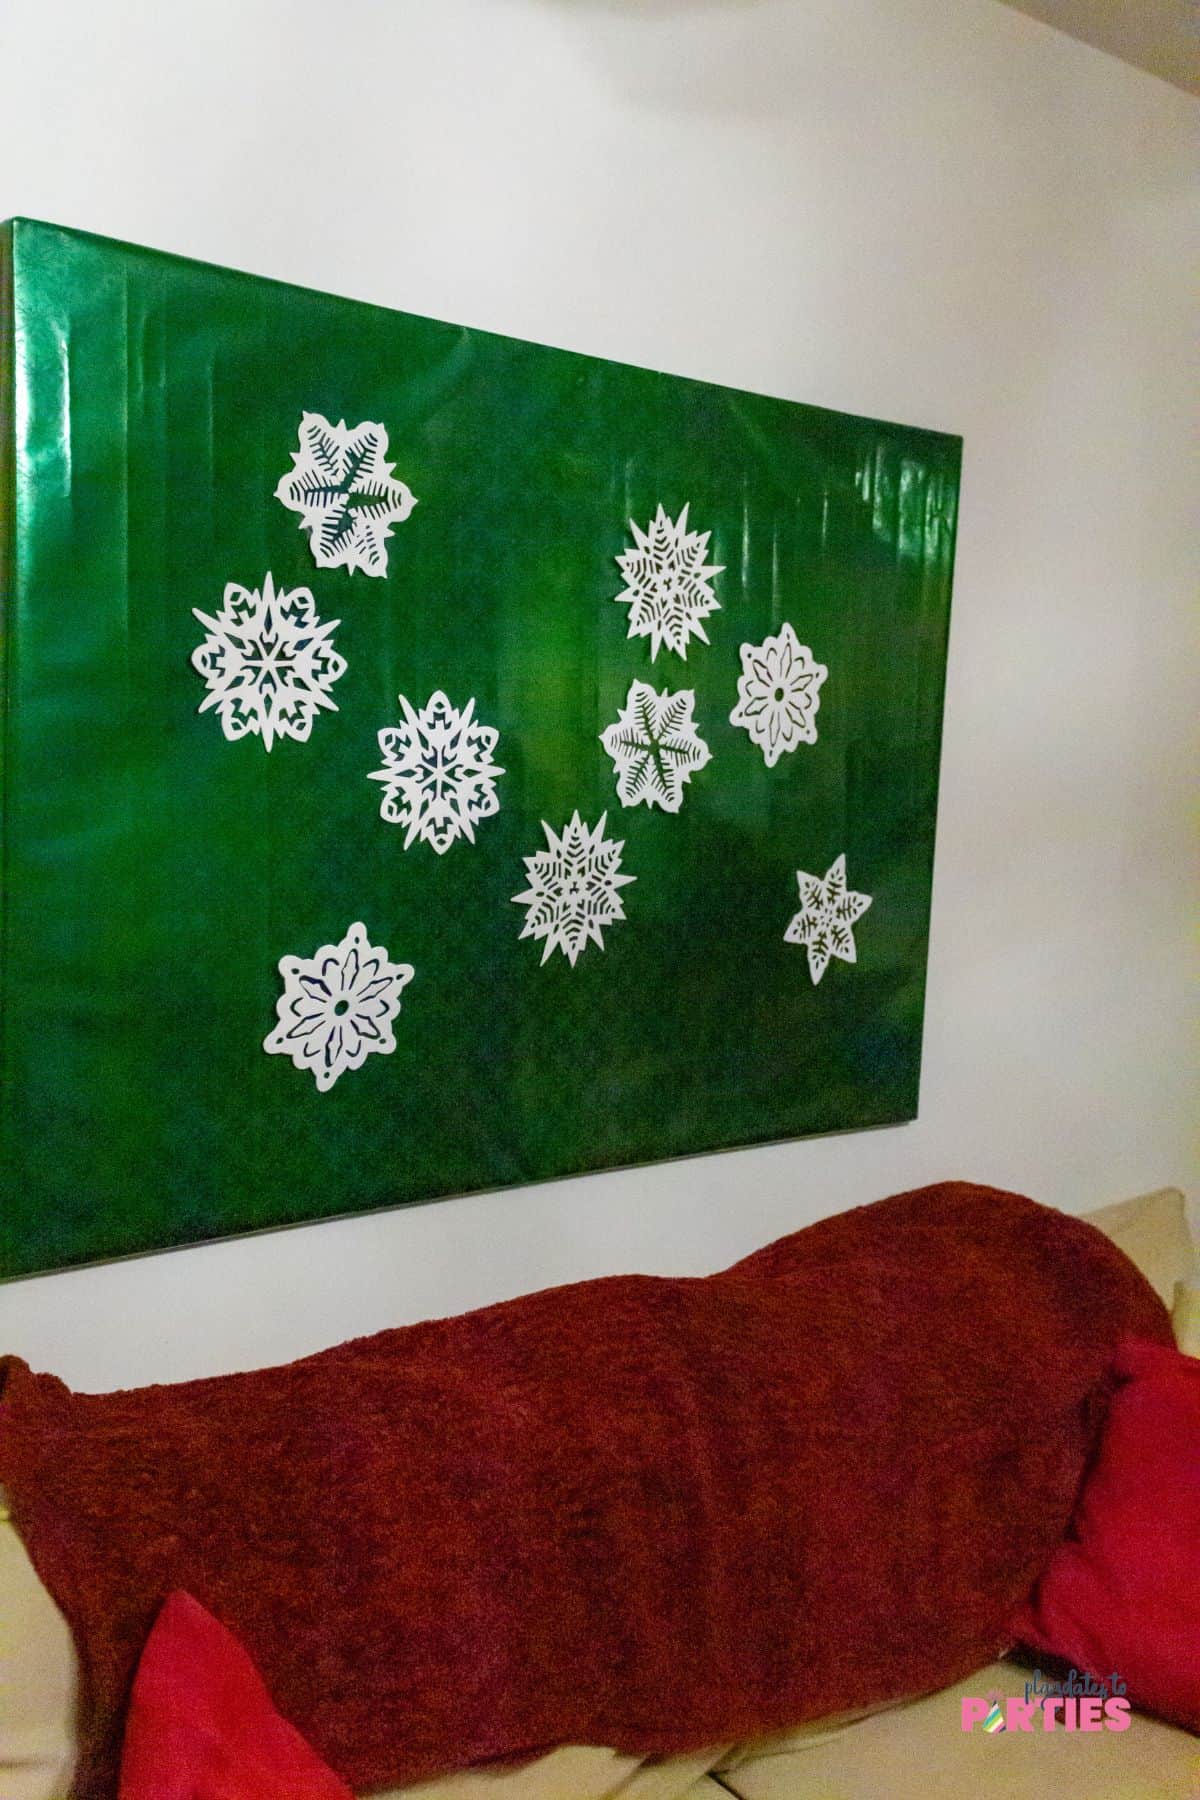 Artwork covered with wrapping paper for a party.